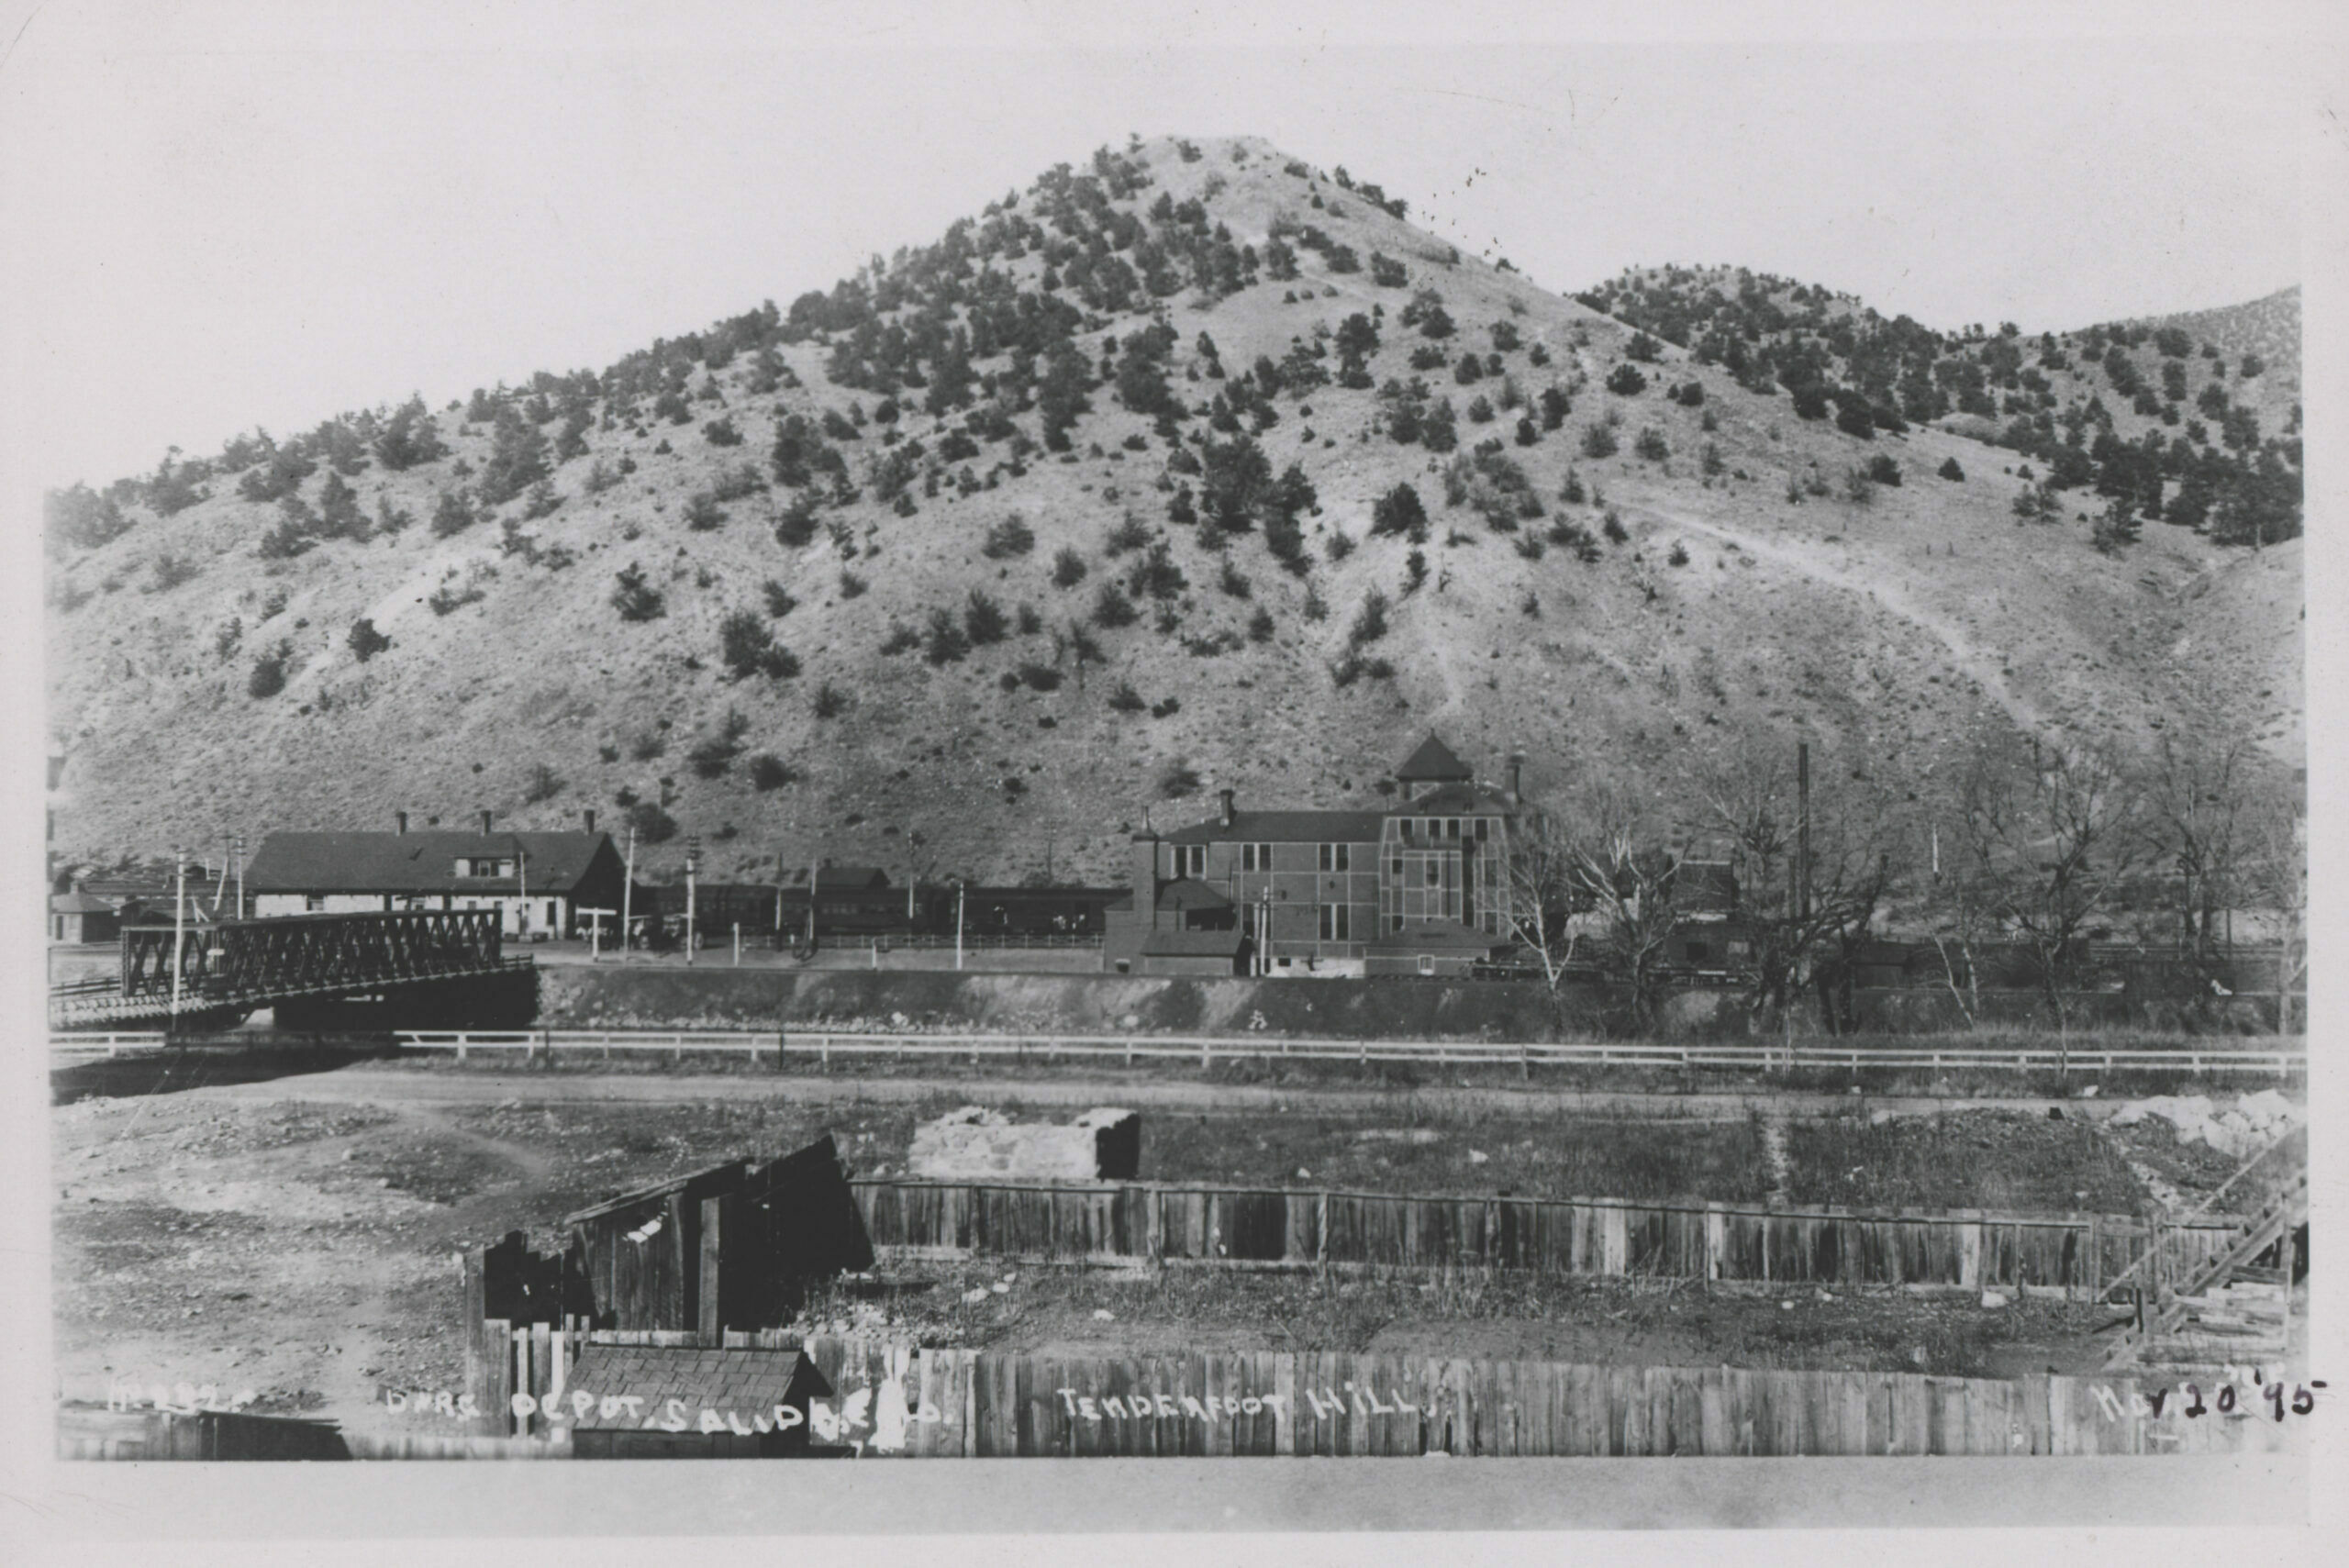 Trees on Tenderfoot Mountain are alive and well when this photograph was taken March 20, 1895. They began dying shortly after the smelter opened – upwind – in 1902, and by 1917 there were almost none left. Two foot paths up the mountain were used by hundreds of visitors who wanted to get a view of the city while they waited to change trains. The mountain was a favorite picnic spot for locals as well.  (1)